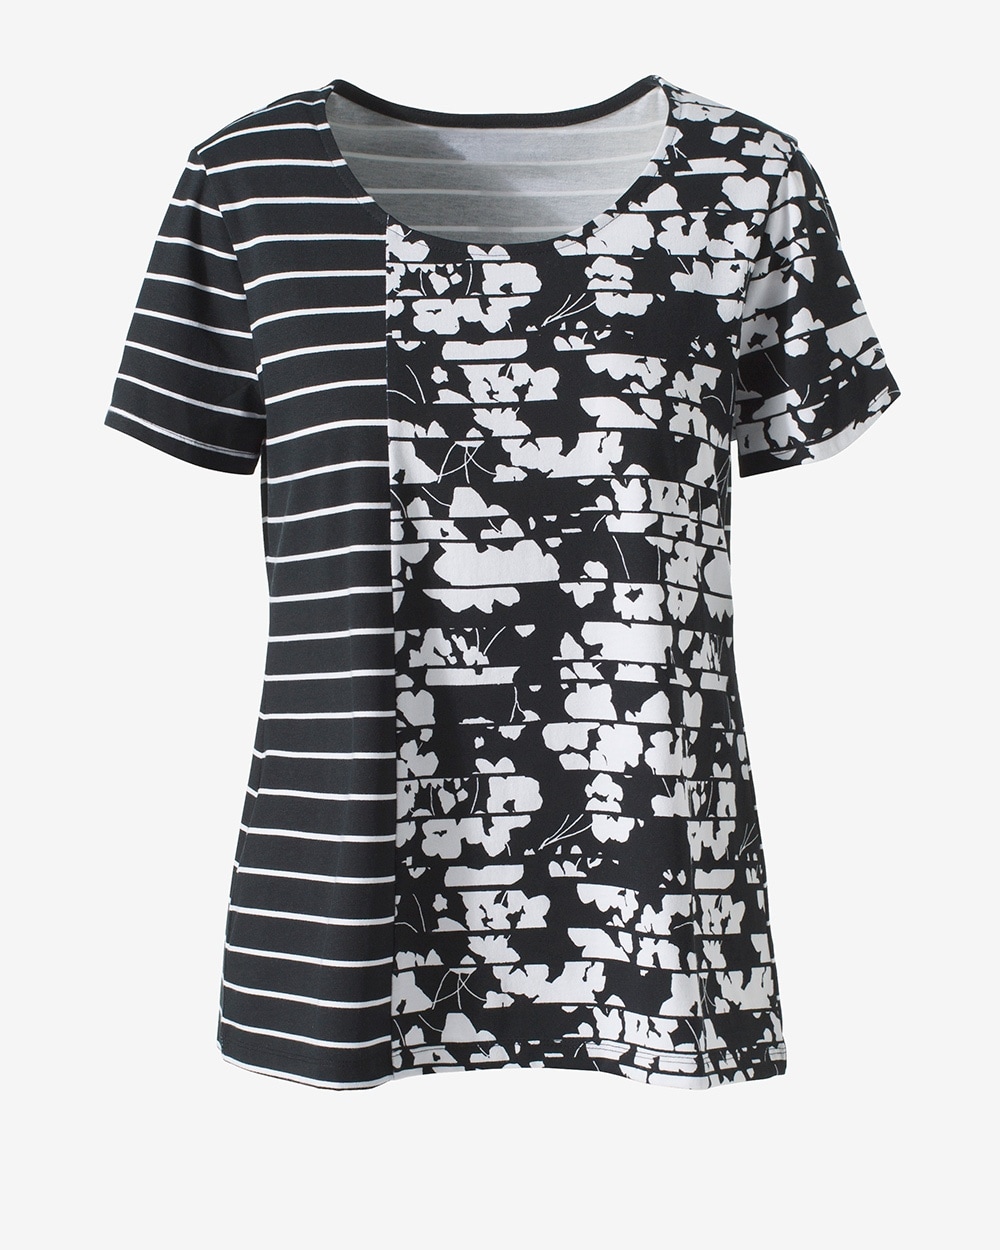 Blinded Floral Stripe Pieced Tee